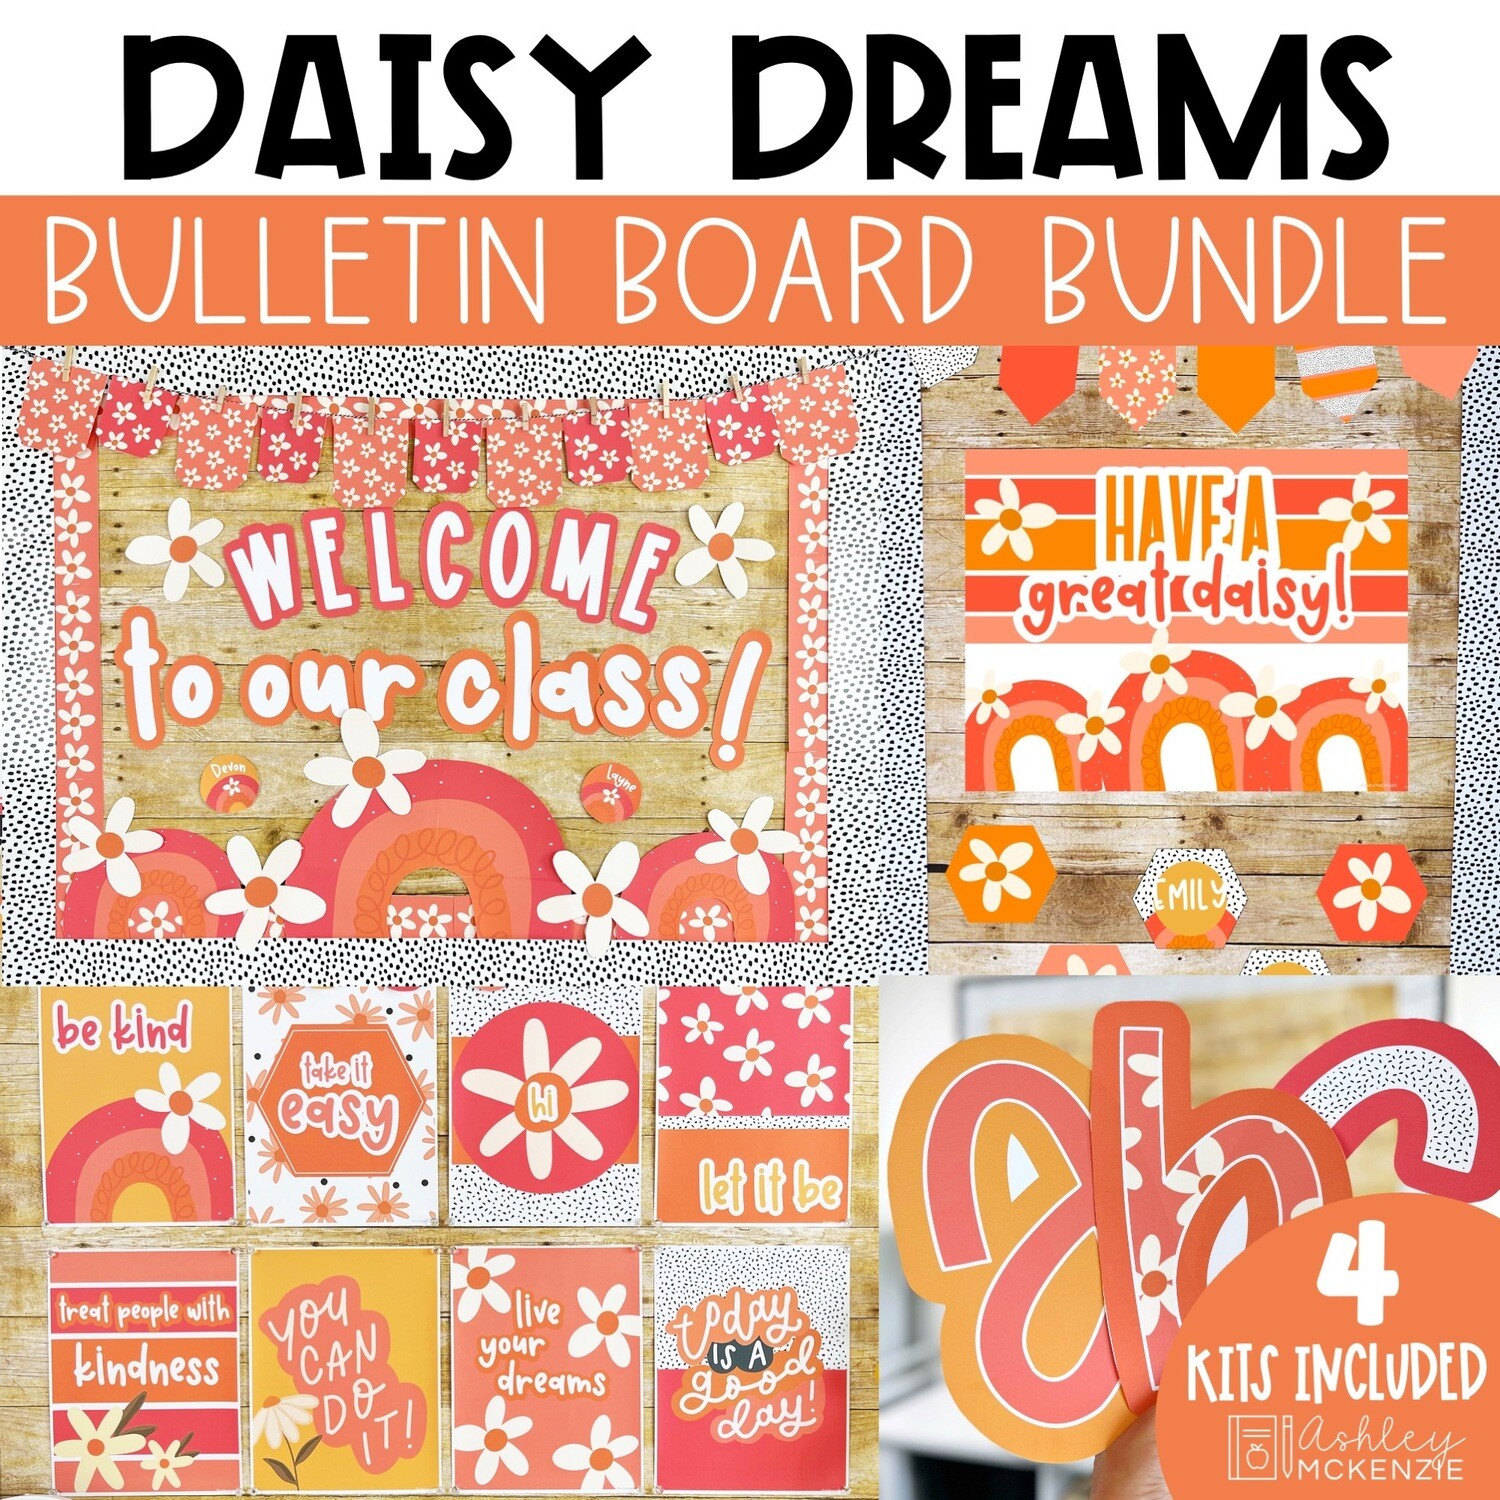 Daisy Dreams Bulletin Board, Posters, A-Z Letters, and Door Decor Bundle